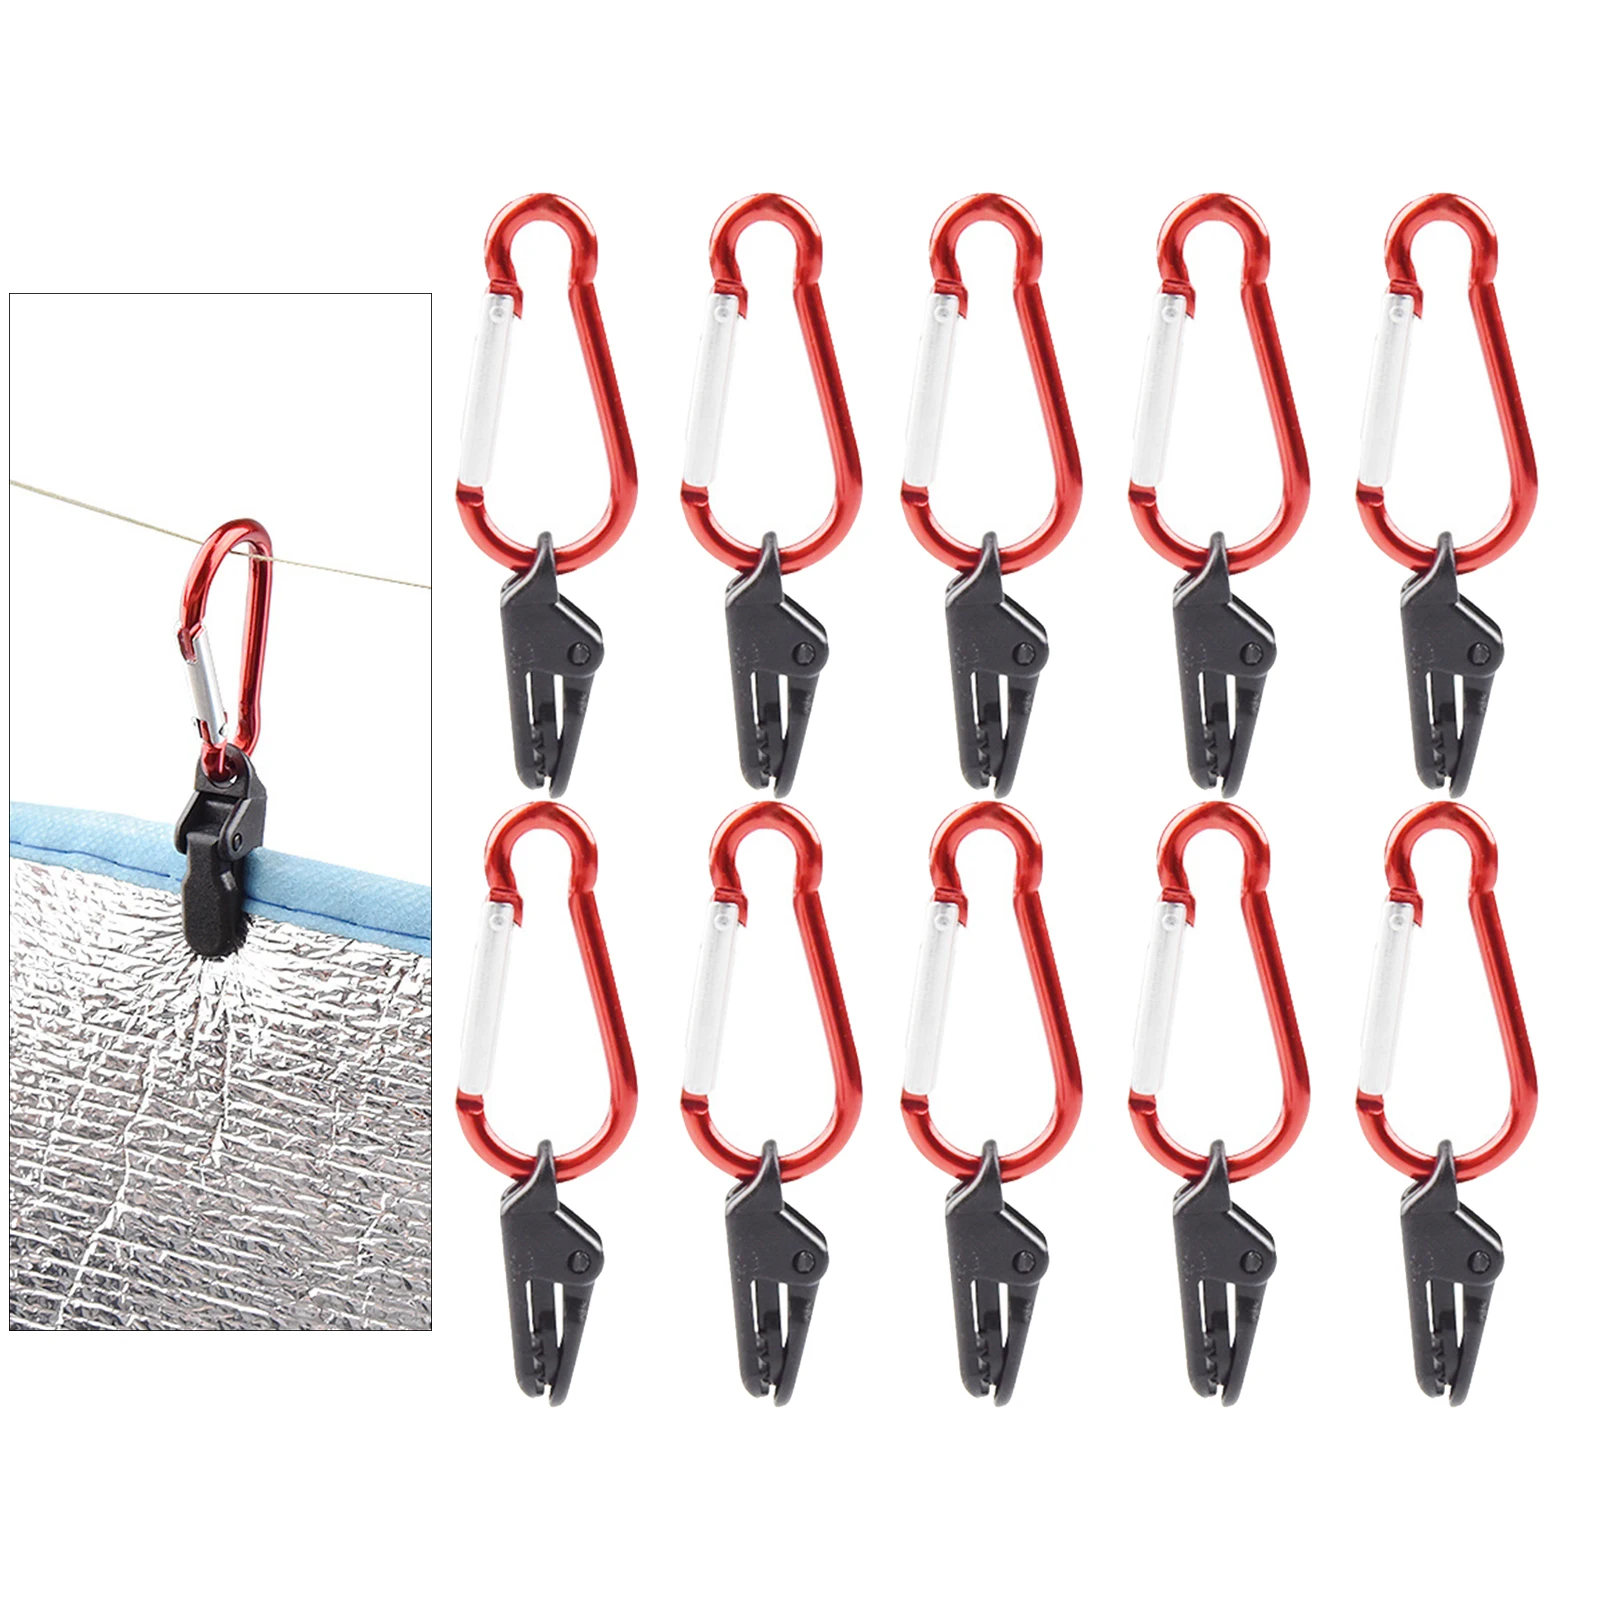 Strong Lock Grip Tent Clamps for Holding up Tarp Heavy Duty Thumb Screw Baodanfirst Tarp Clips Awnings Car,Swimming Pool,Boat 10 pcs Caravan Canopies Hammock Covers Outdoor Camping Canopy 